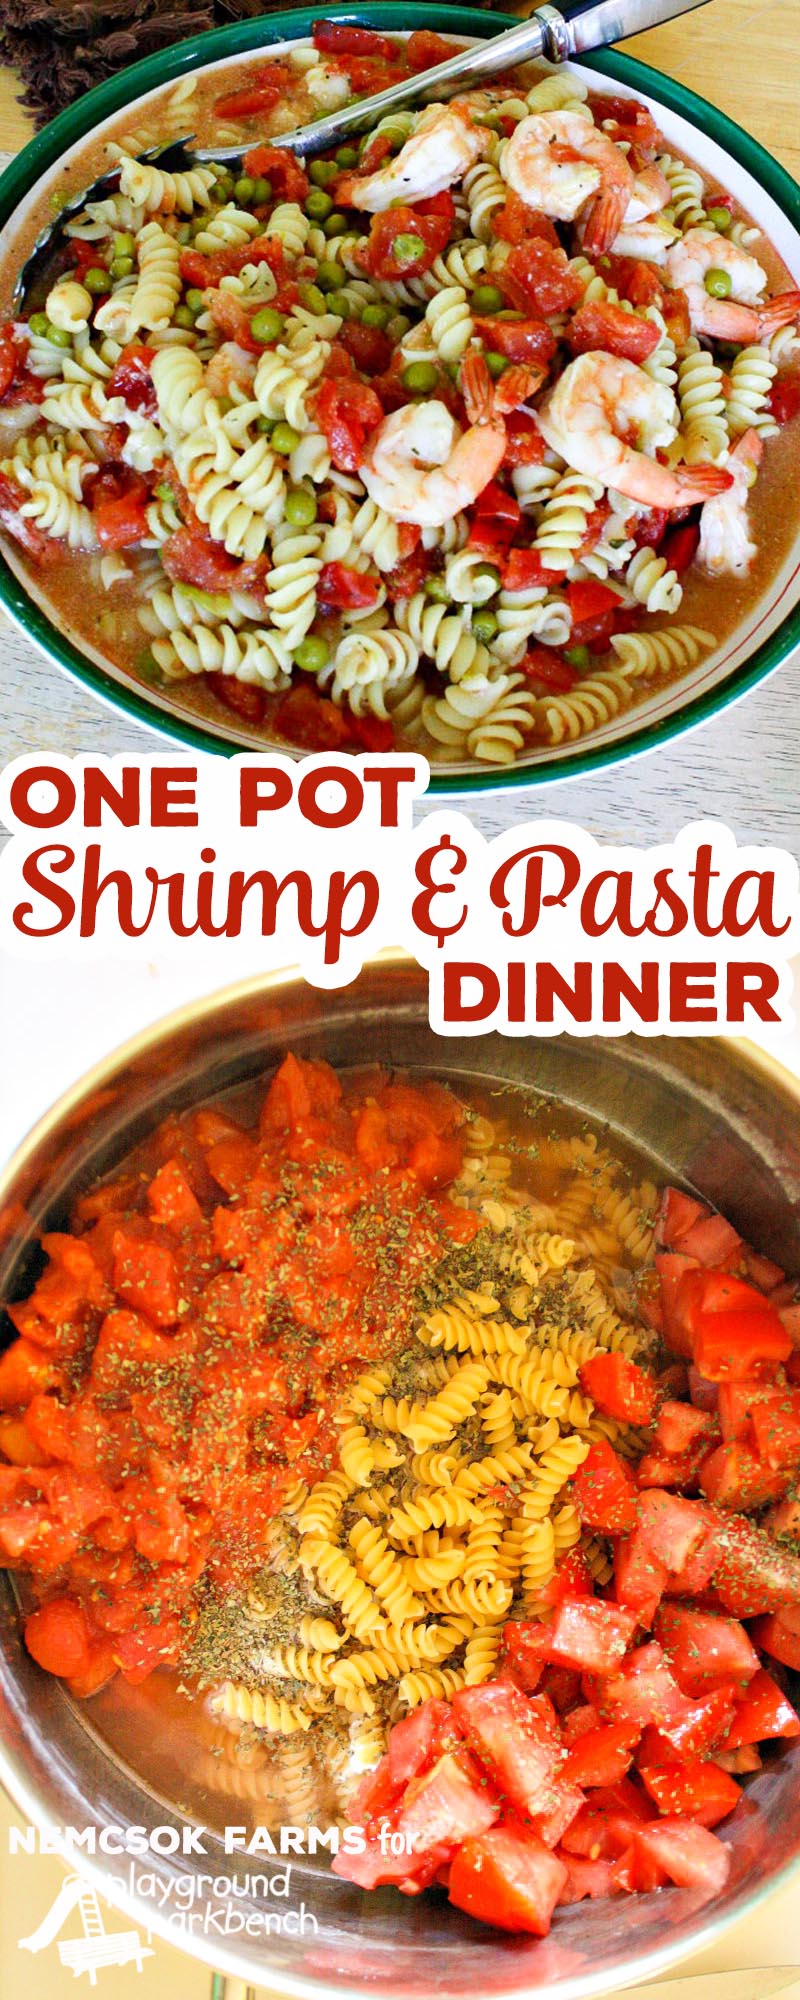 At a loss for quick weeknight recipes now that school is back in session? Have this one pot Shrimp and Pasta dinner on the table in just 20 minutes. The latest in our Real Mom Meals series